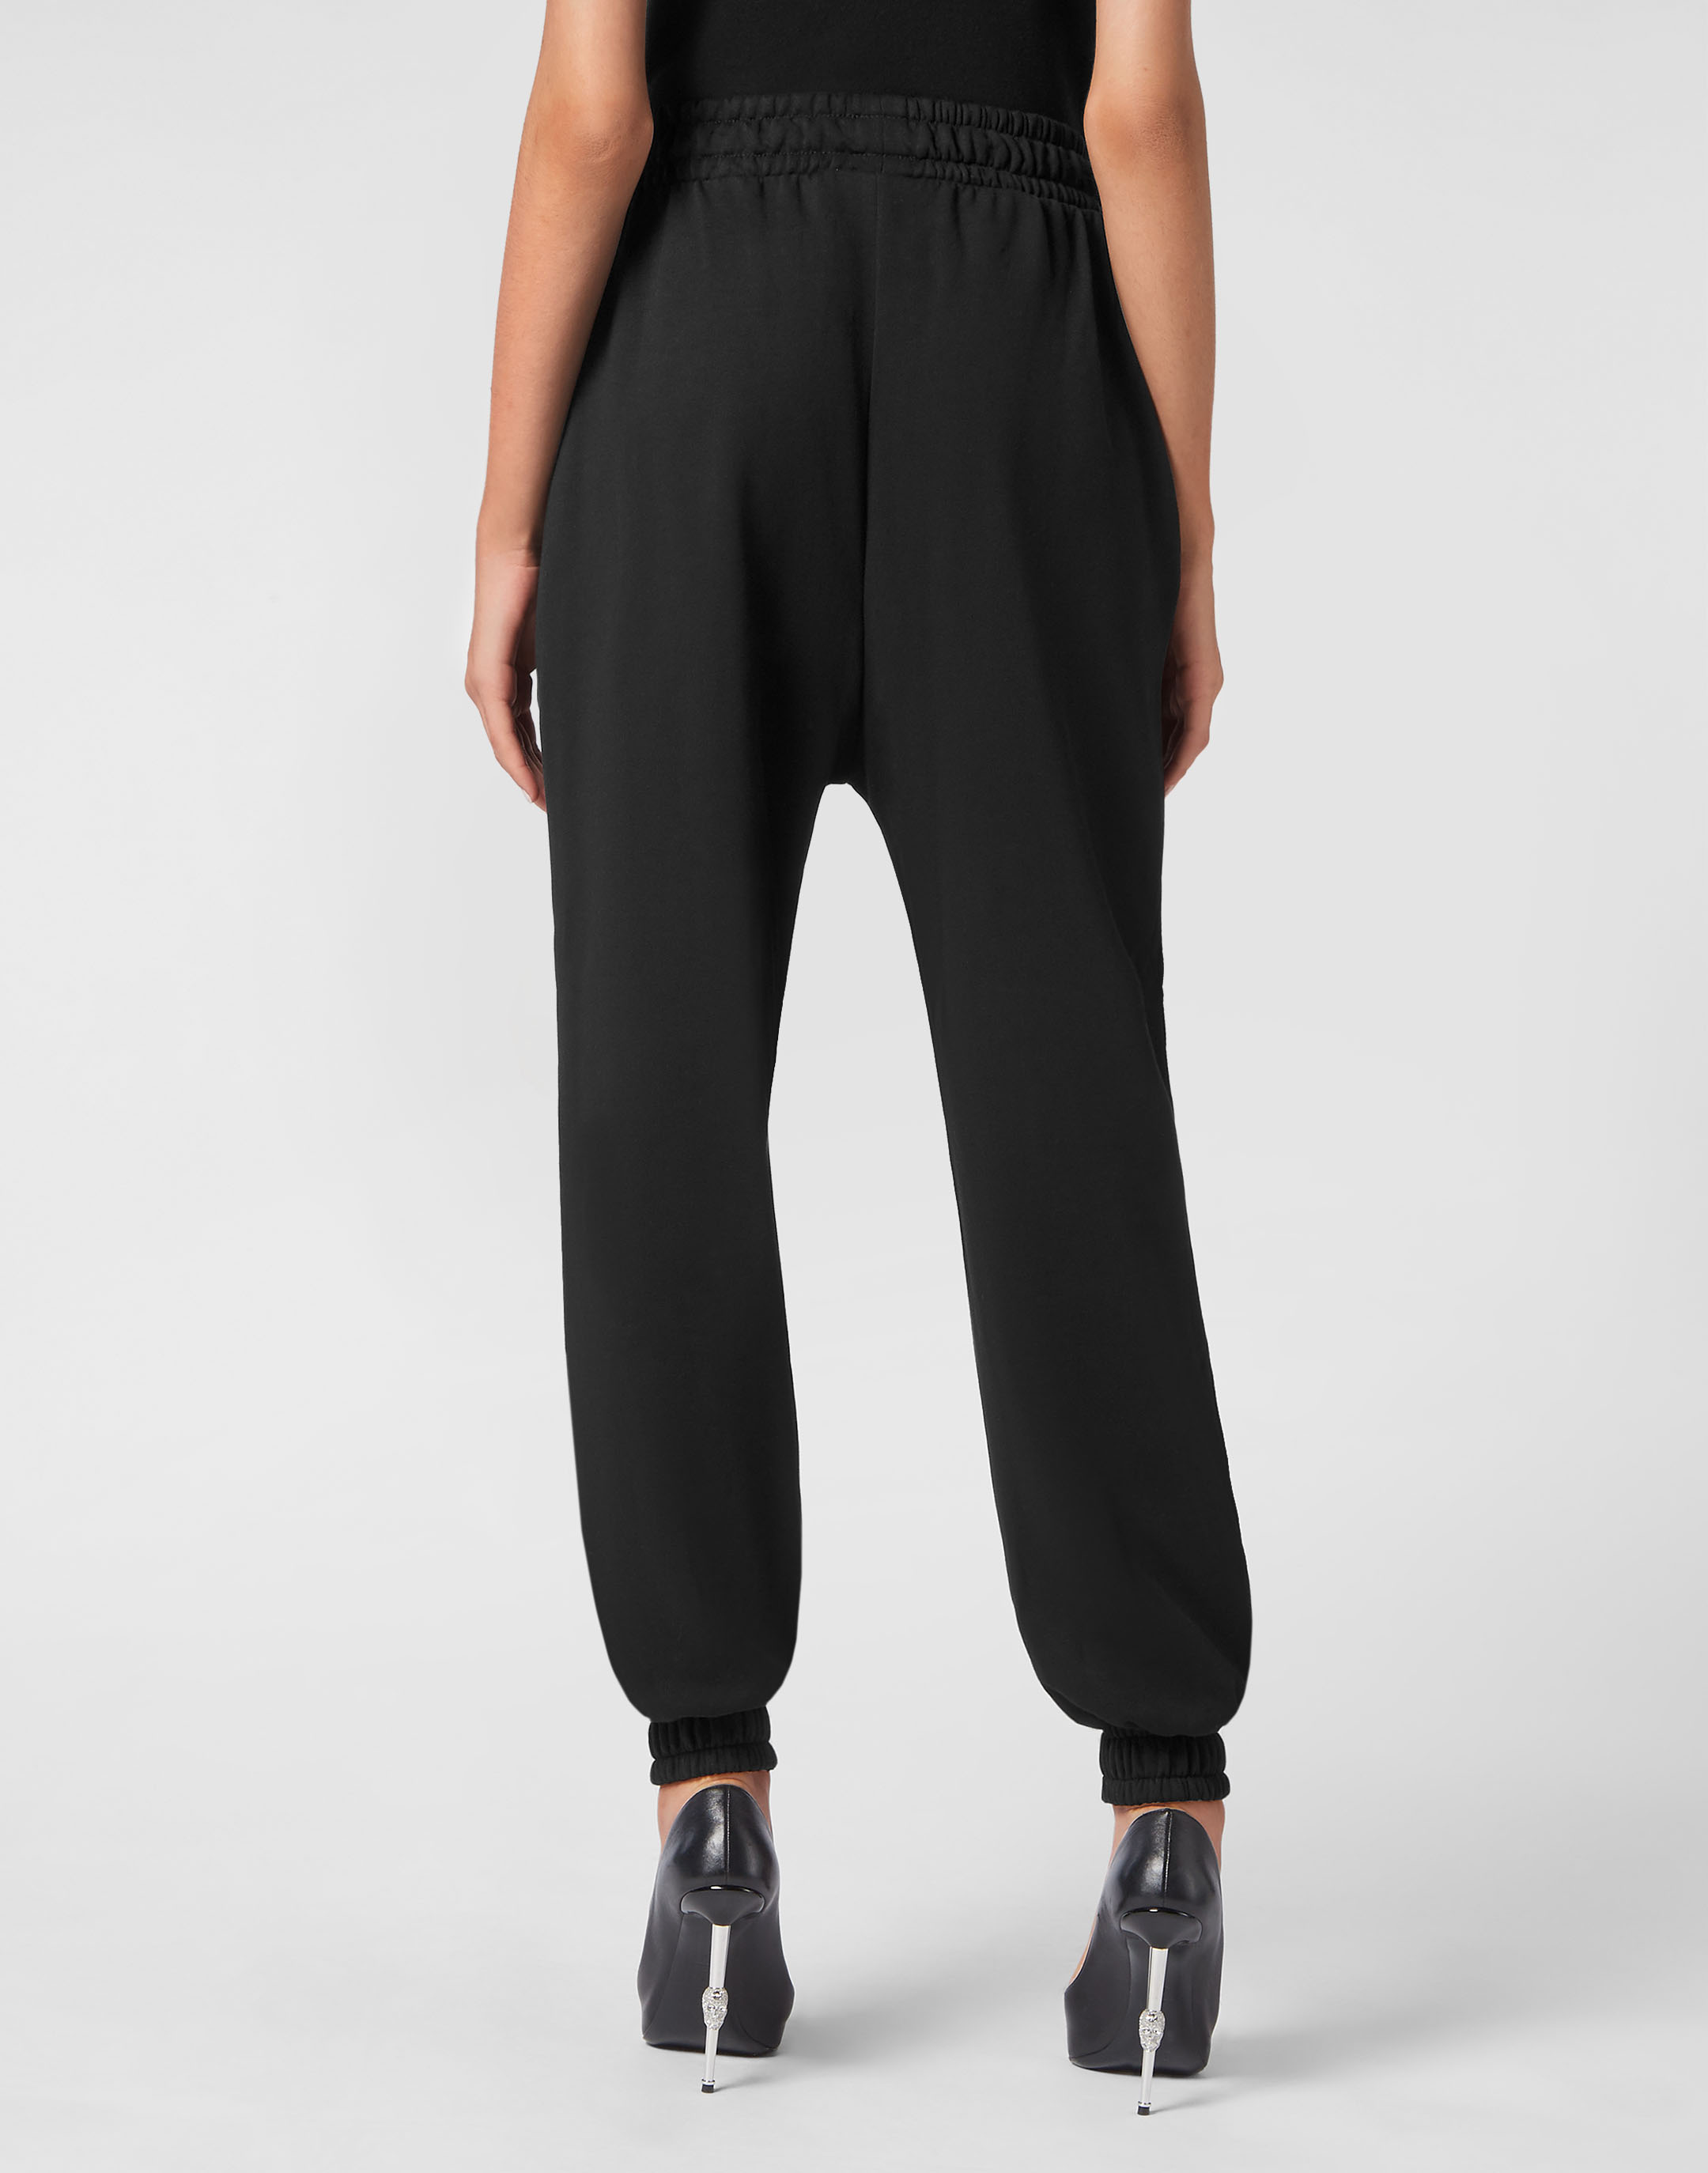 Leisurewear Trousers Embroidery Signature | Philipp Plein Outlet